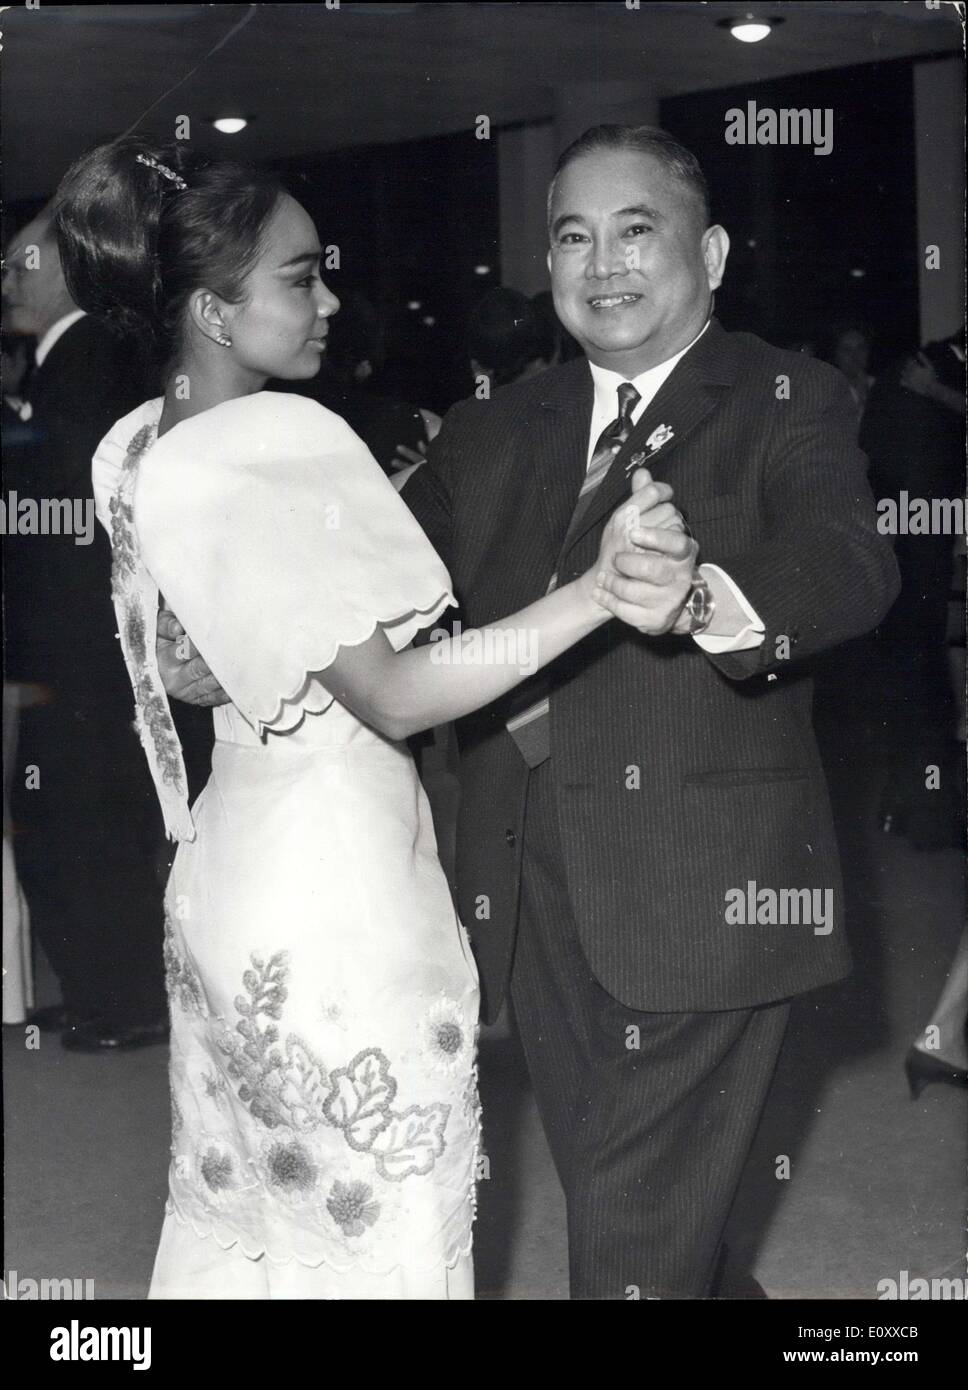 Dec. 13, 1967 - Dancing Ambassador: Manilla dancers who are now performing in Paris were guests at the Philippine Embassy last night. Photo shows Ambassador Jose Alejandrino dancing with the star dancer of the Manilla Ballet company. Stock Photo